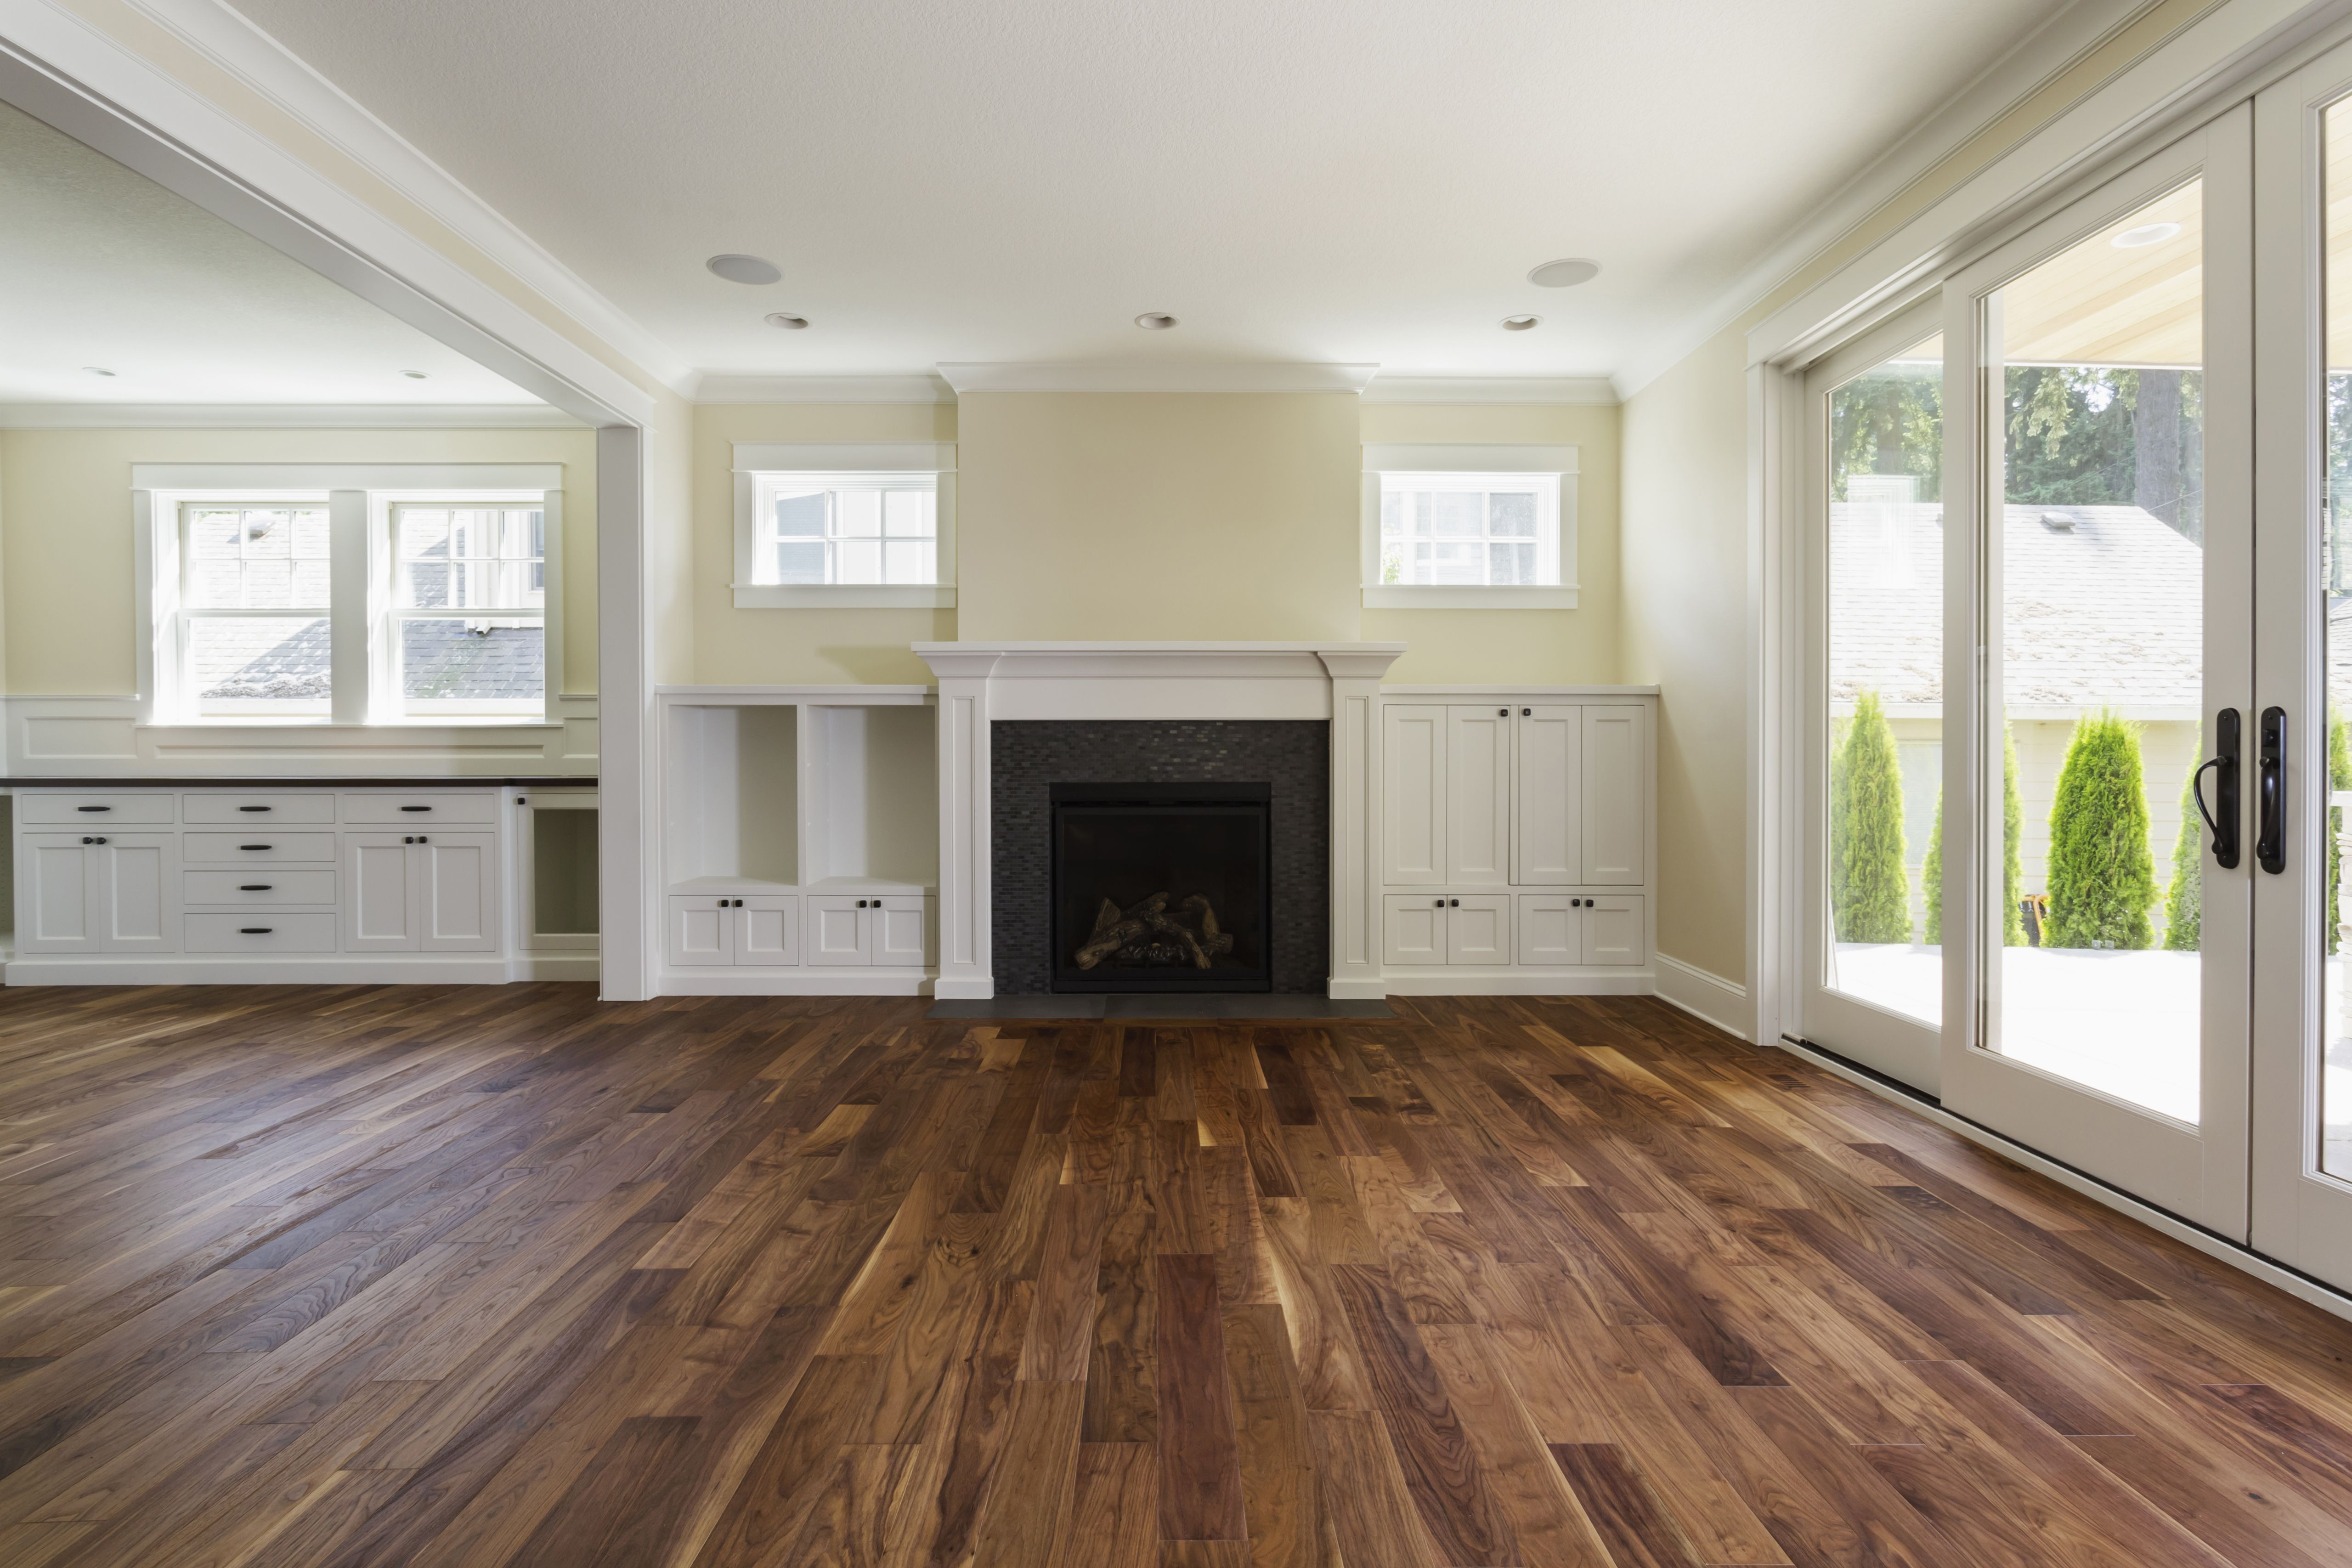 10 Fantastic Hand Scraped Engineered Hardwood Flooring Pros and Cons 2024 free download hand scraped engineered hardwood flooring pros and cons of the pros and cons of prefinished hardwood flooring for fireplace and built in shelves in living room 482143011 57bef8e33df78cc16e03